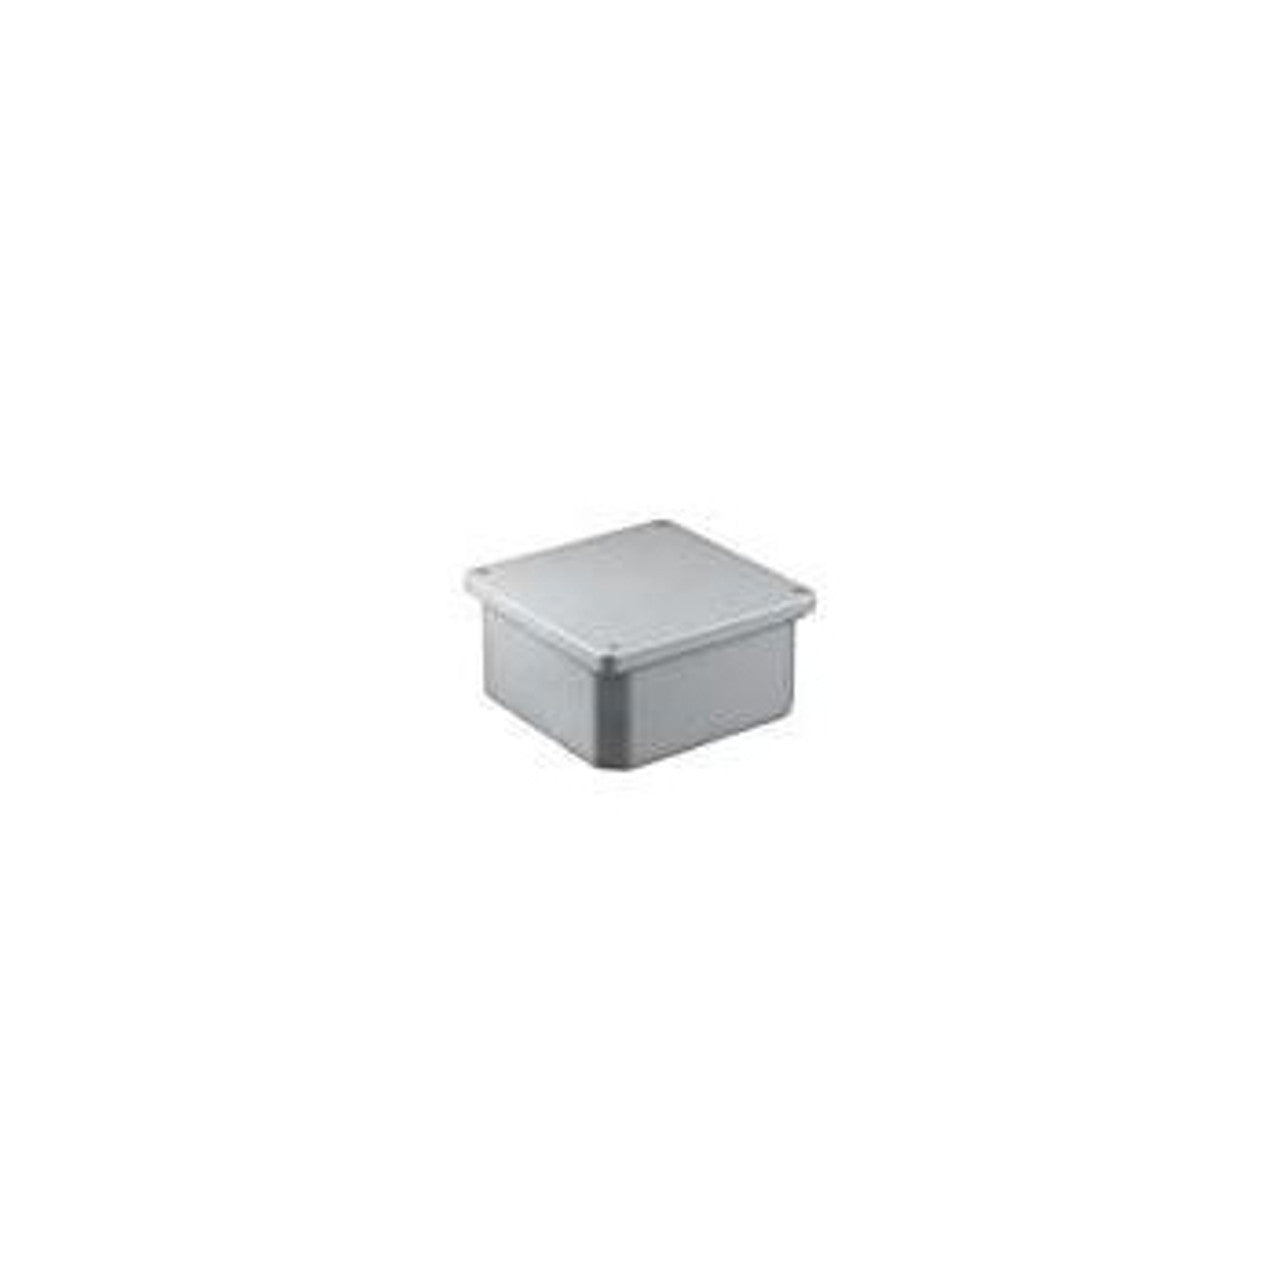 ROYAL RJB12128 Conduit Junction Box With Gasket, 12 x 12 x 8 in